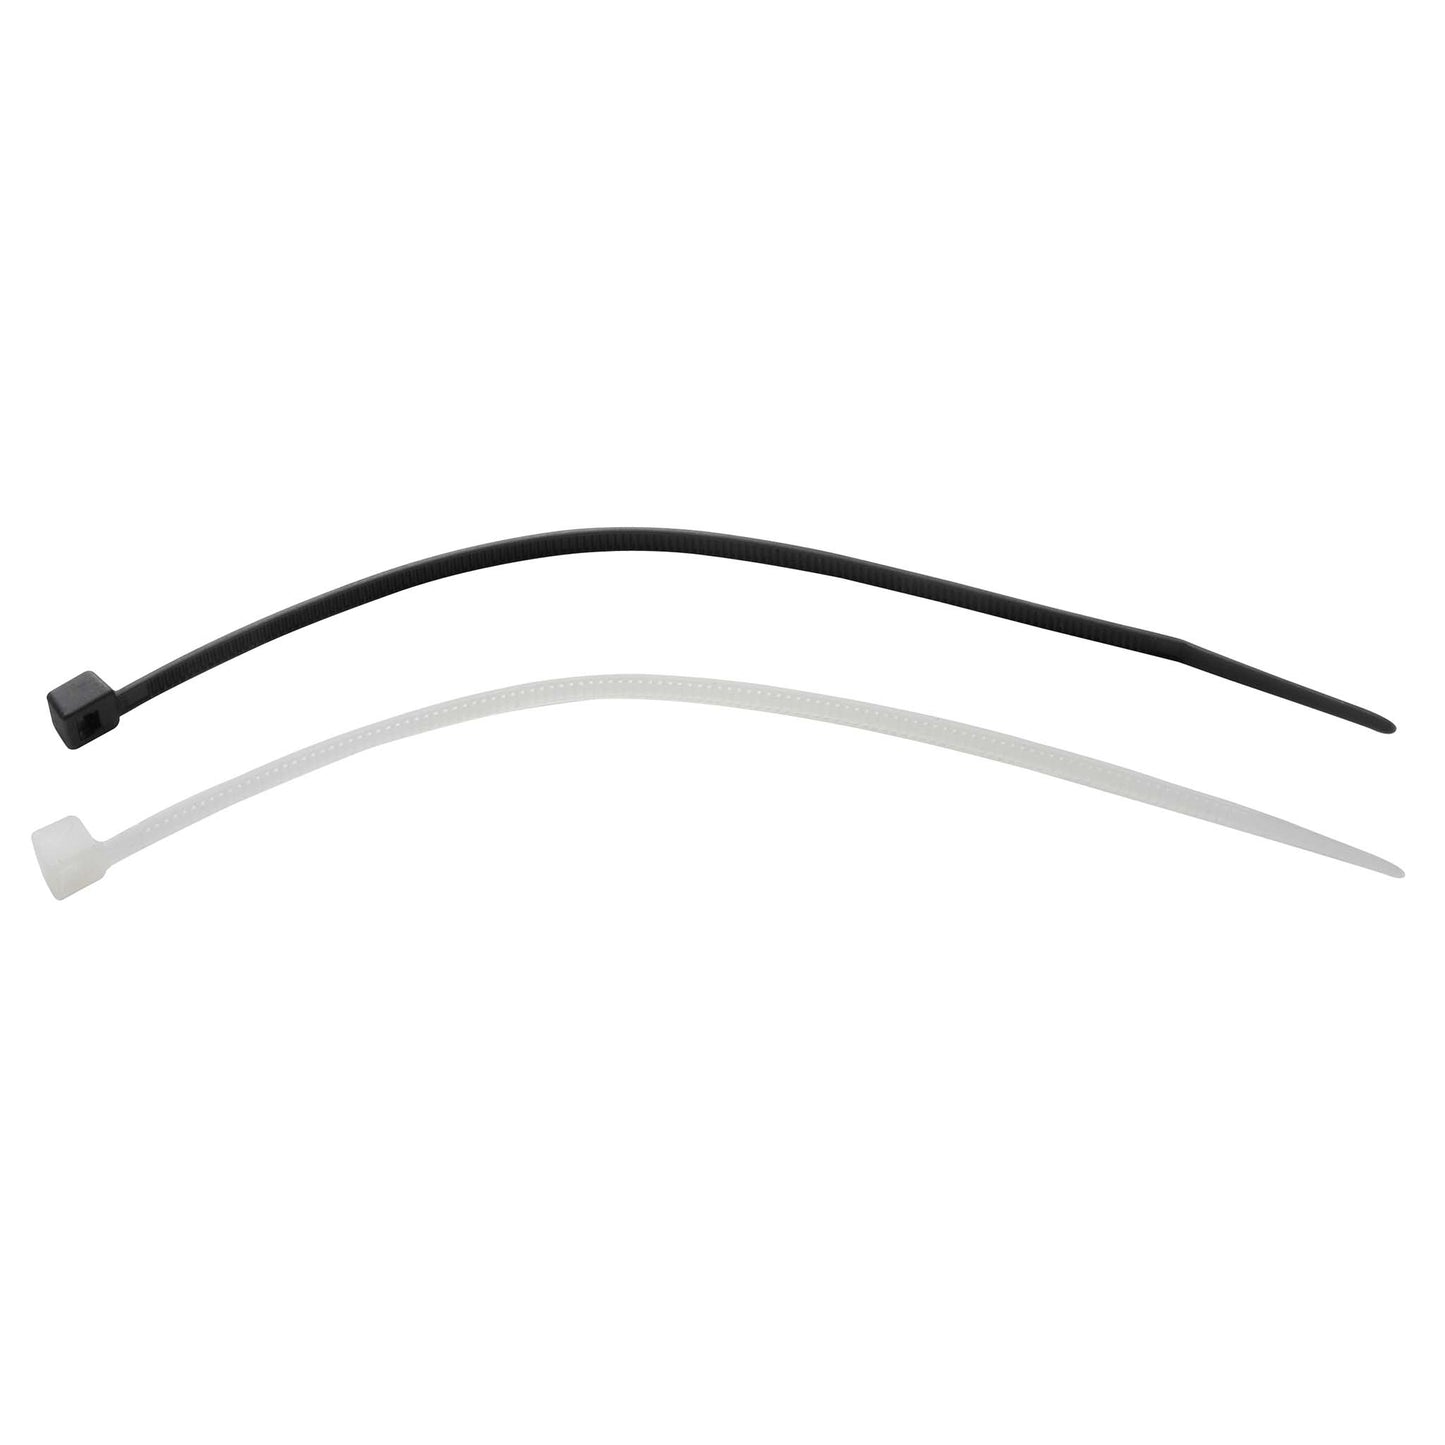 Cable ties 200 x 4.8 mm - black